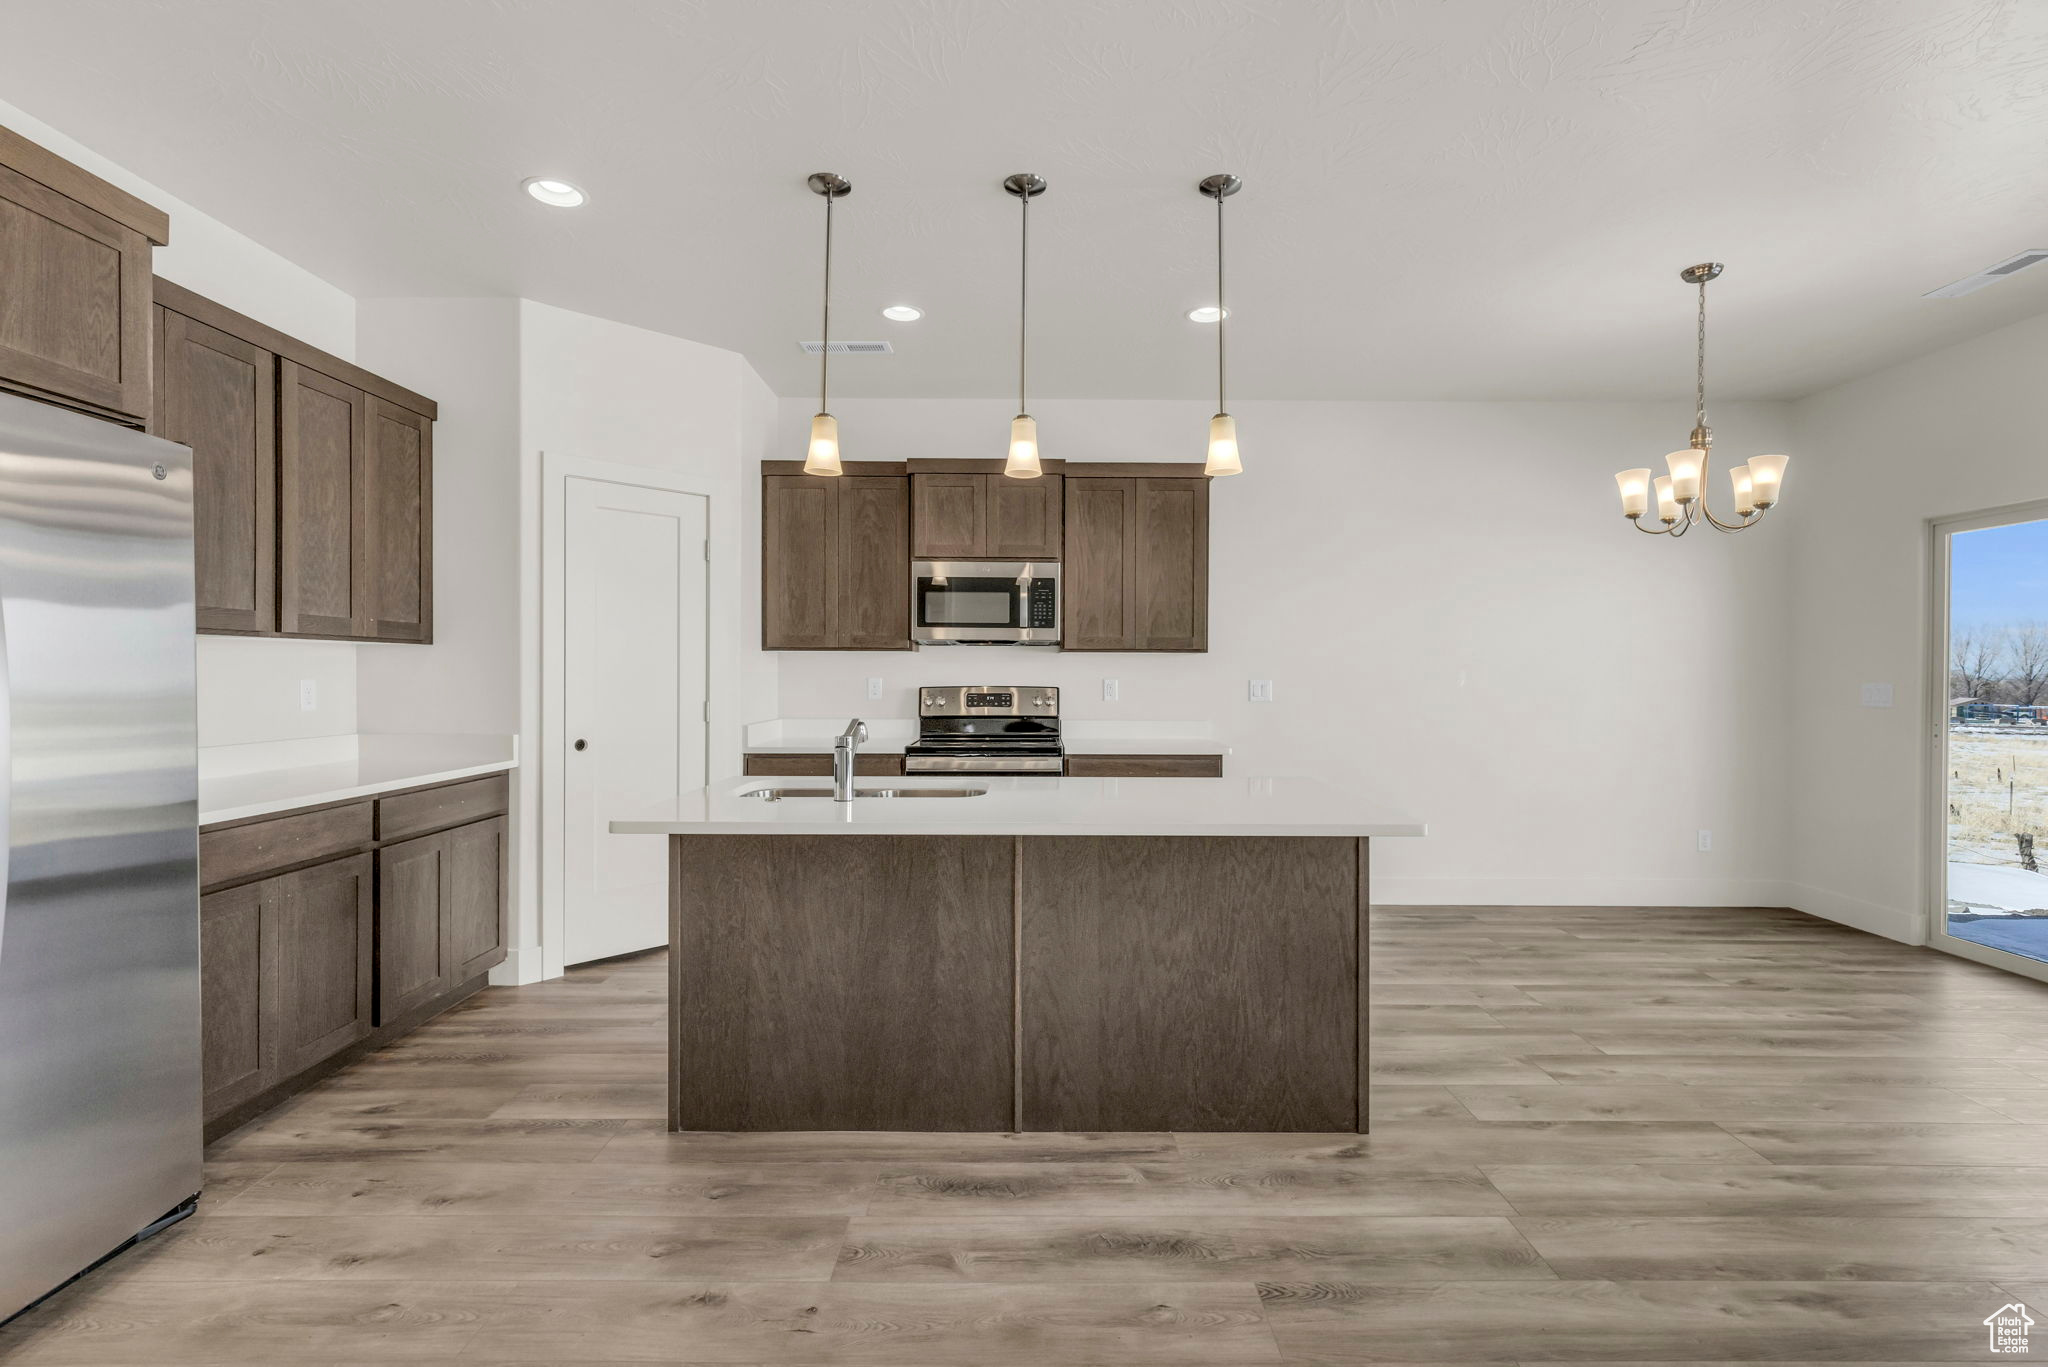 Kitchen with dark brown cabinets, a notable chandelier, hanging light fixtures, appliances with stainless steel finishes, and light hardwood / wood-style flooring